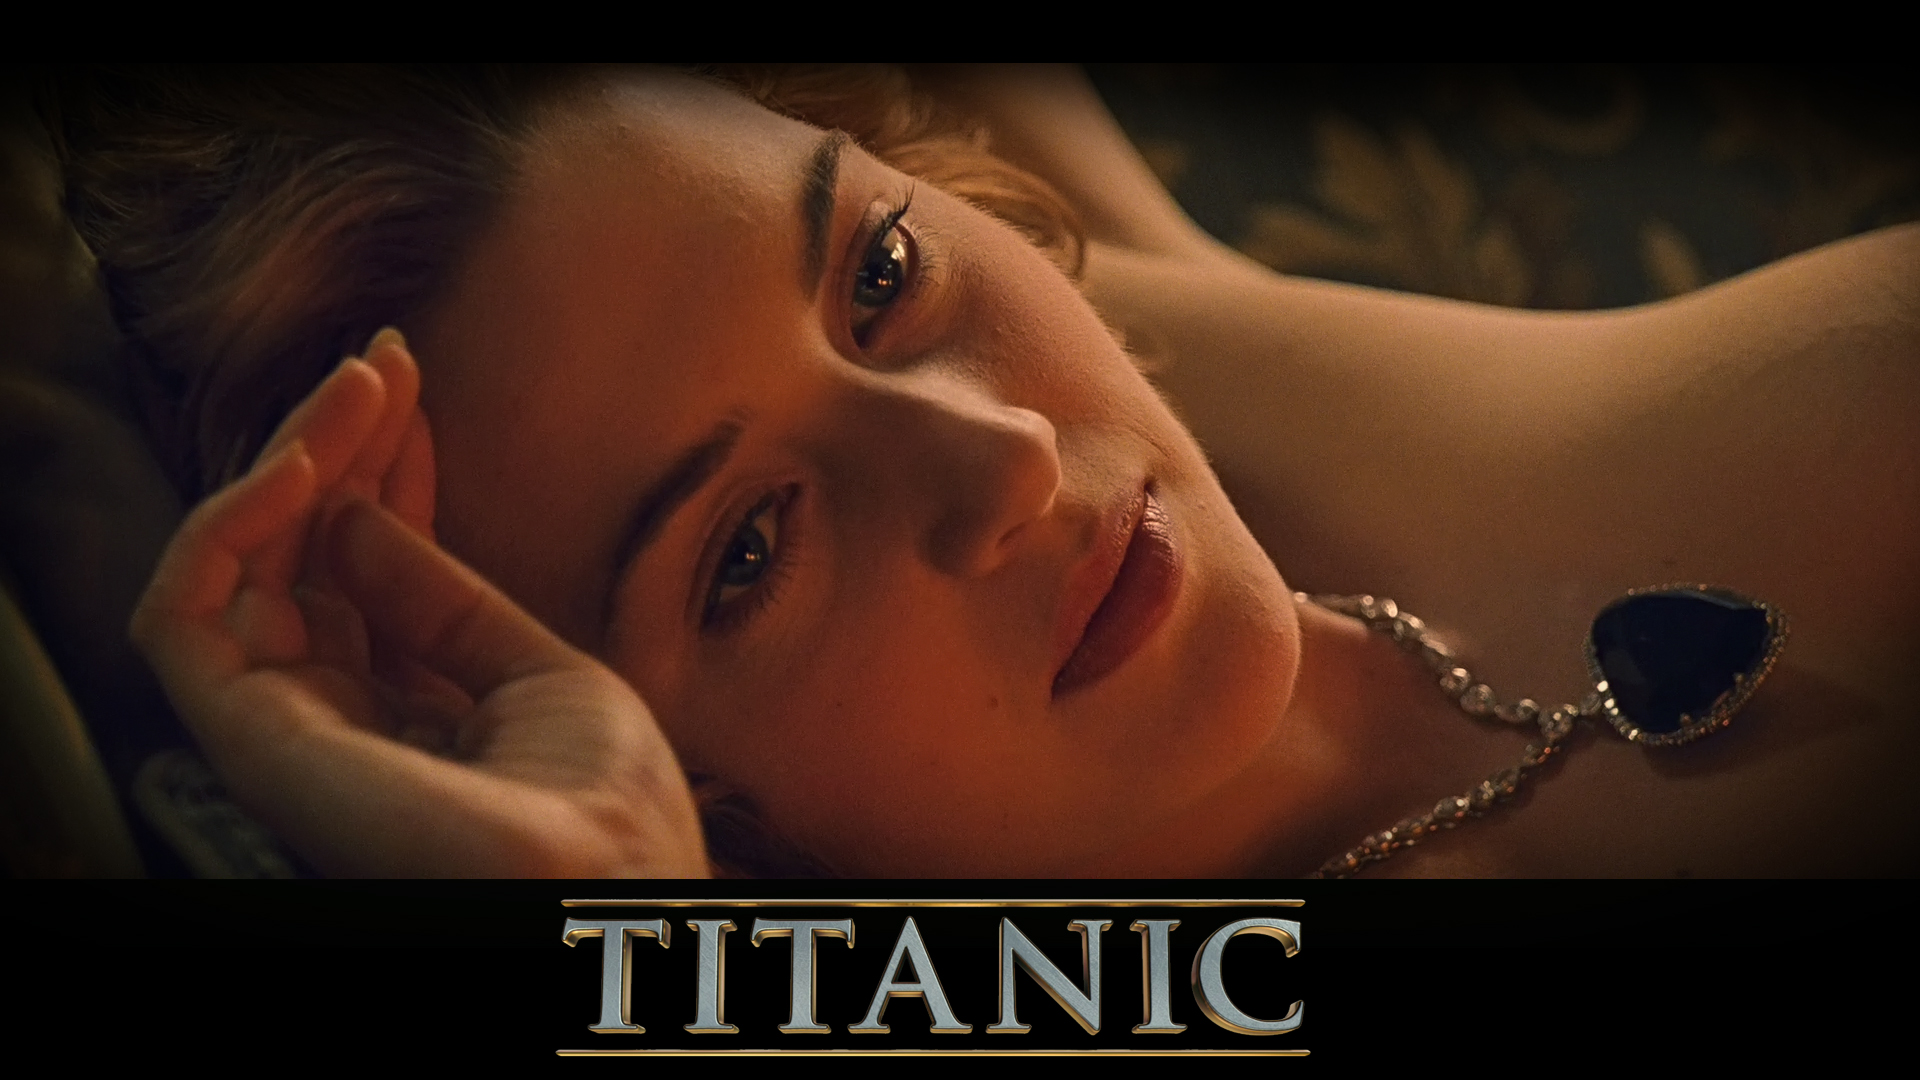 Titanic movies sexy hot direct see boobs